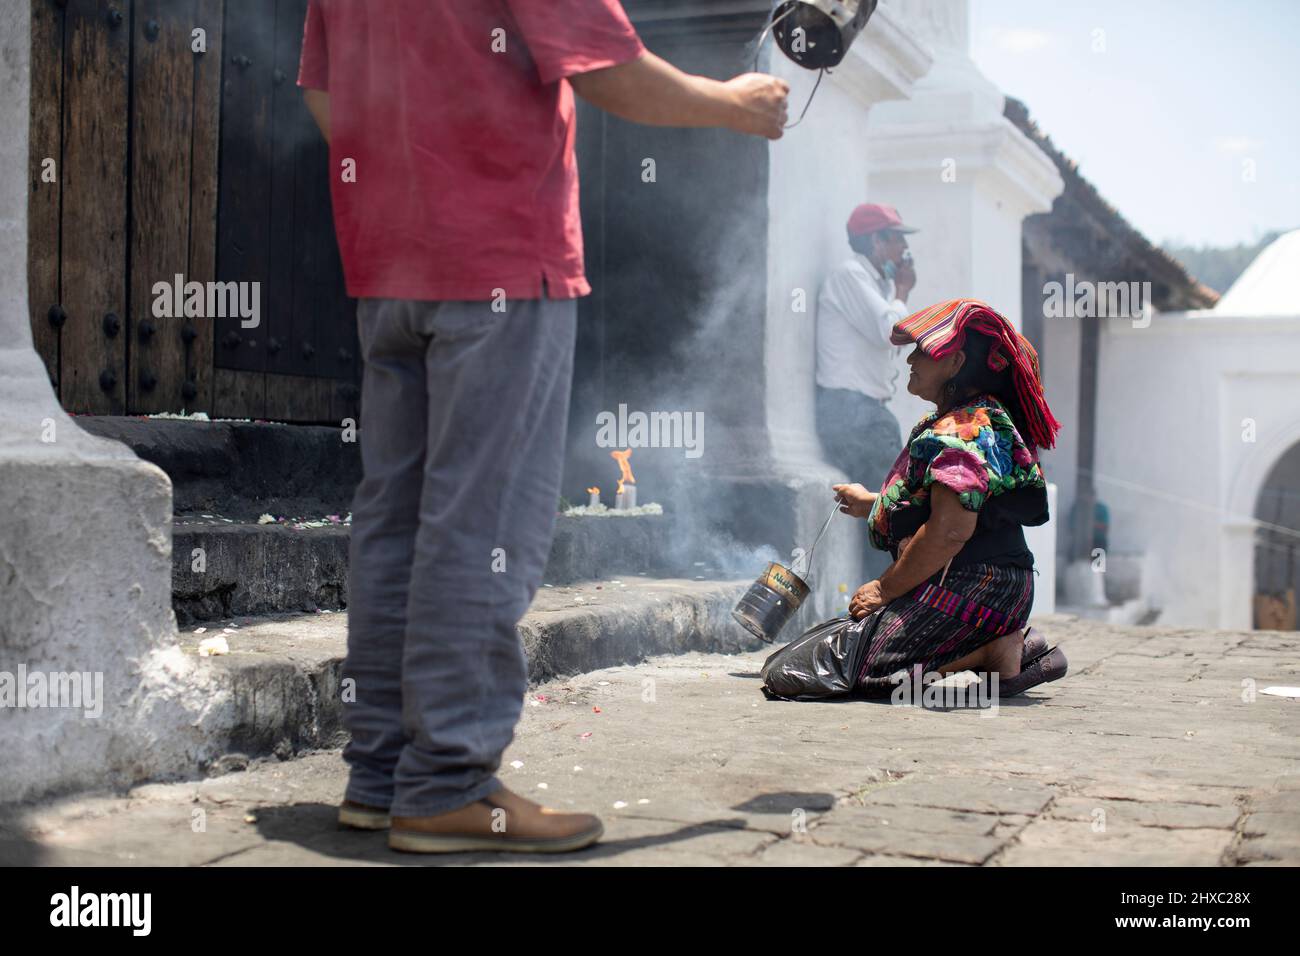 Religious ceremony at the colorful weekly Chichicastenango Mayan Market in Guatemala, Central America. Stock Photo